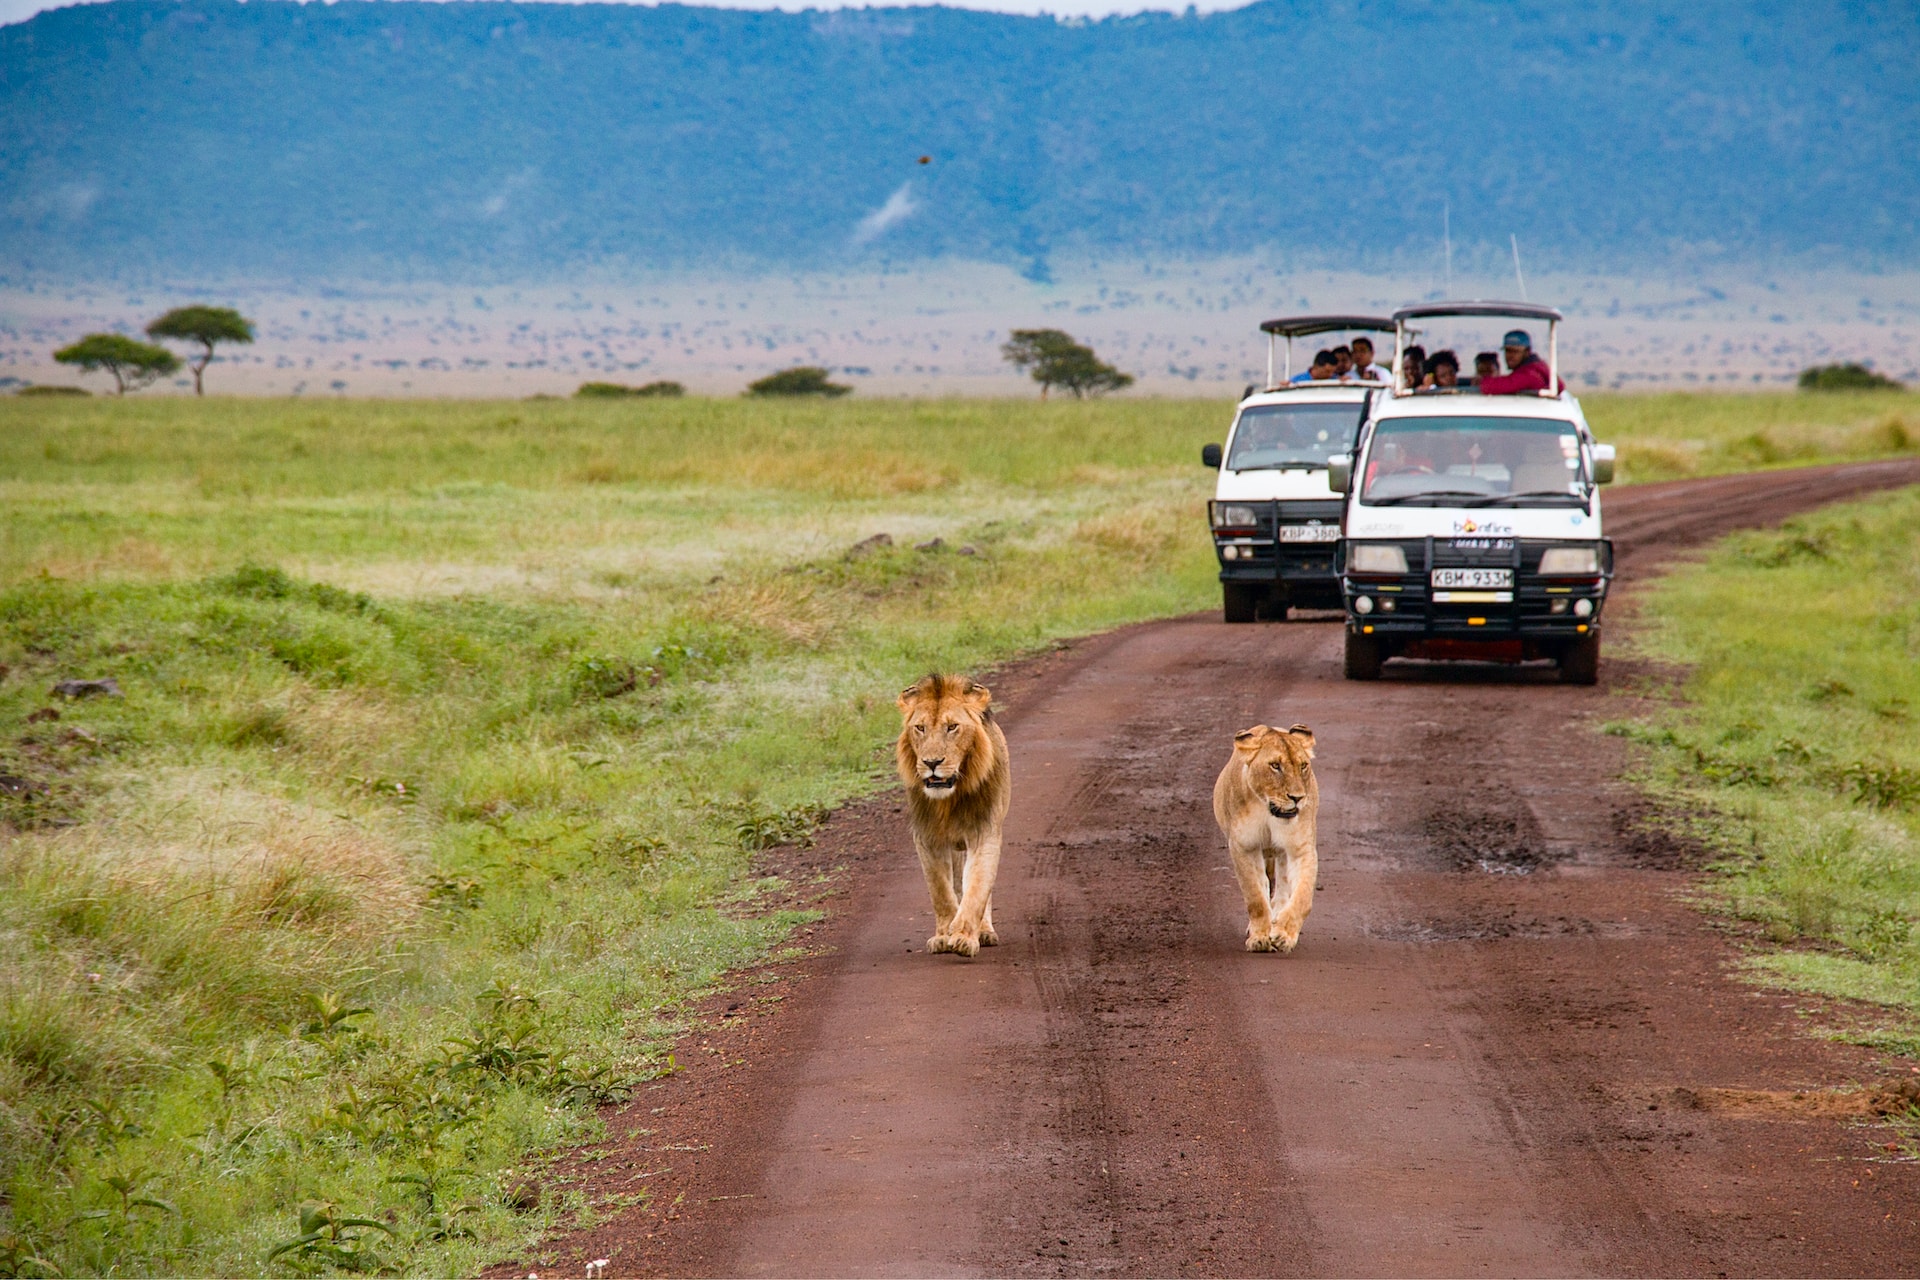 Journey to Kenya to explore Cultures, Landscapes and Wildlife safari